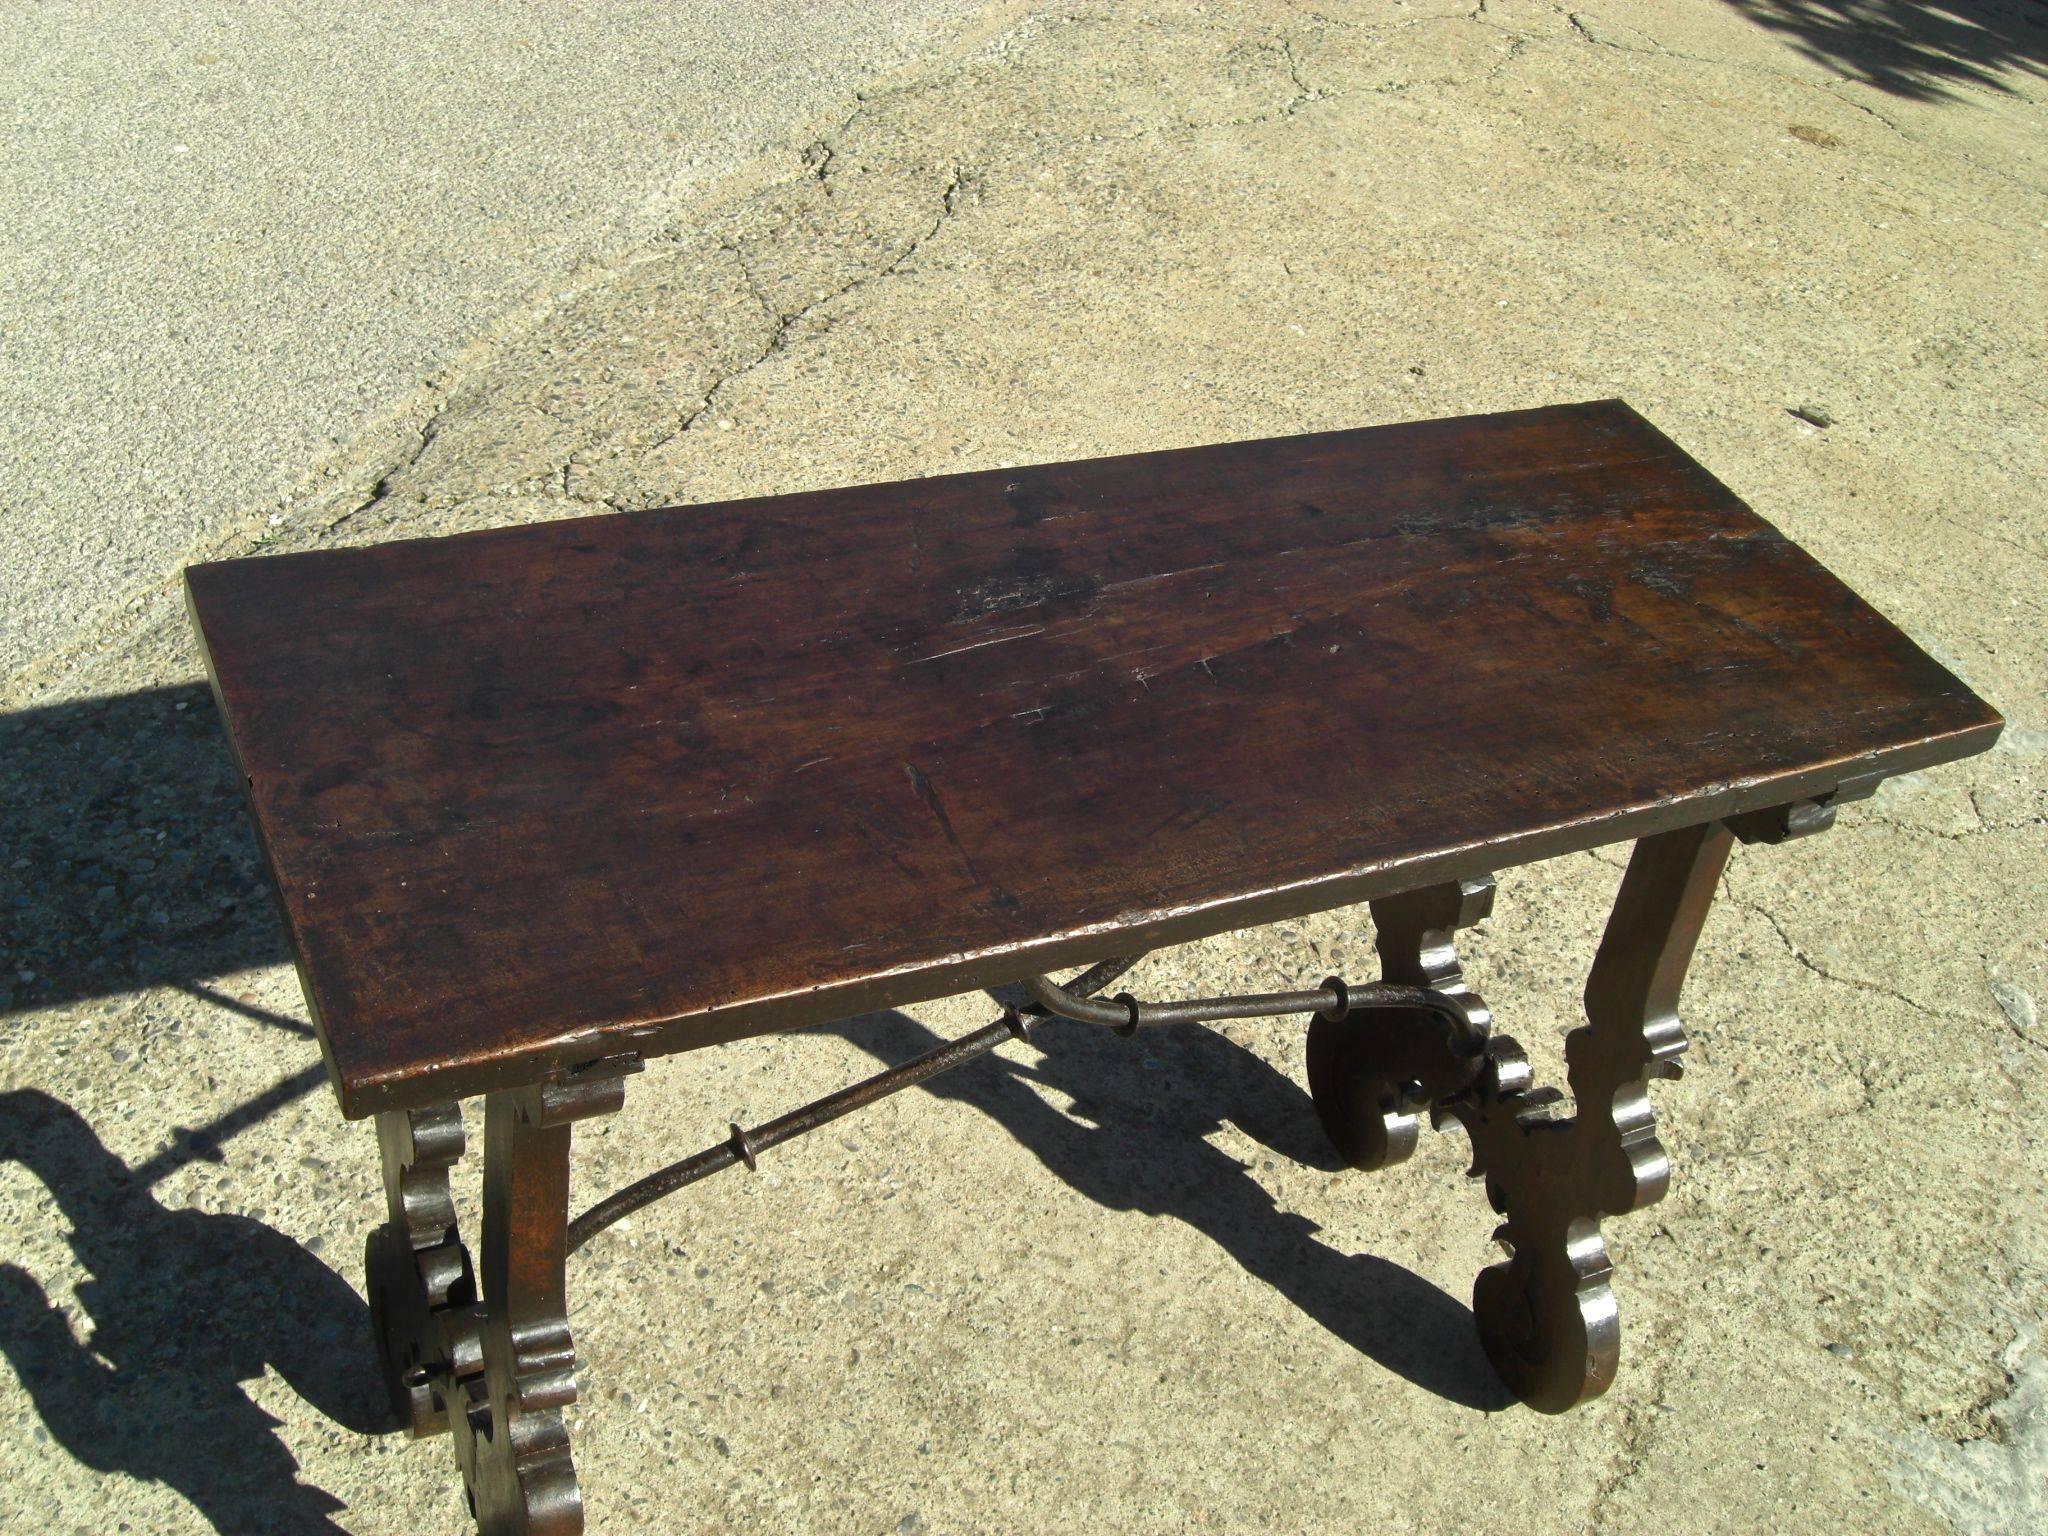 Baroque Late 17th-Early 18th Century Walnut Lyre Leg Table with Iron Stretchers